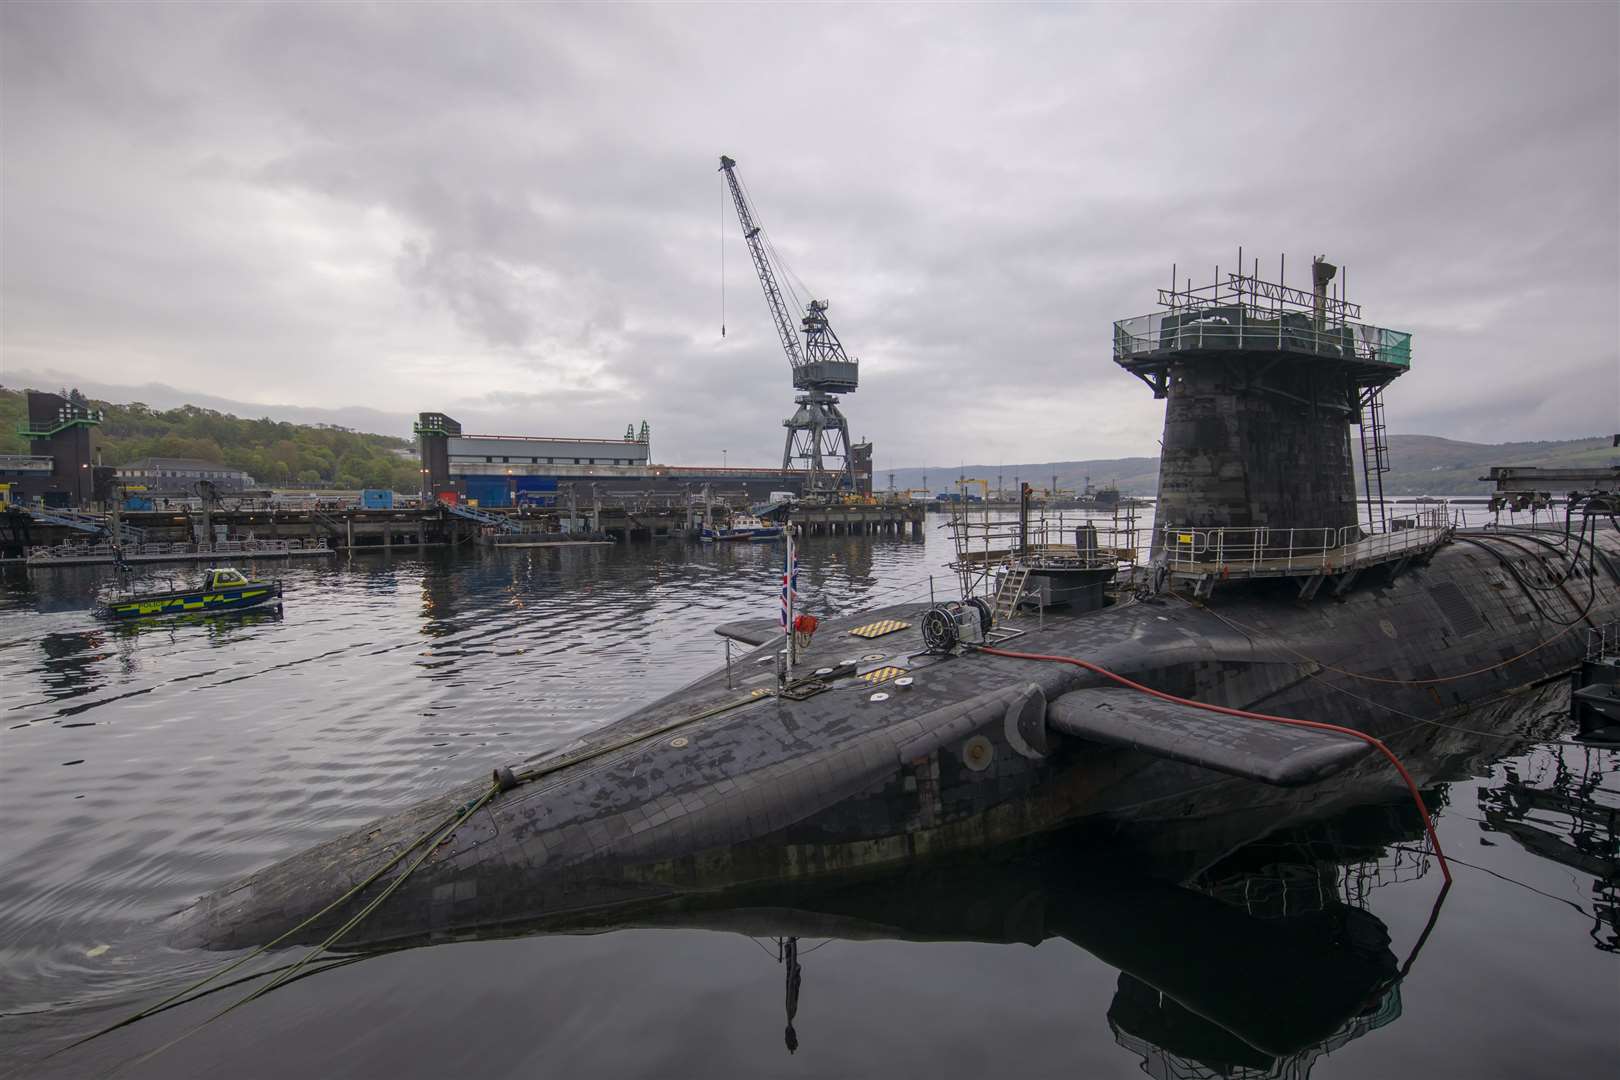 Prioritising the Defence Nuclear Enterprise risked further squeezing budgets for conventional capabilities, the Public Accounts Committee warned (James Glossop/The Times/PA)